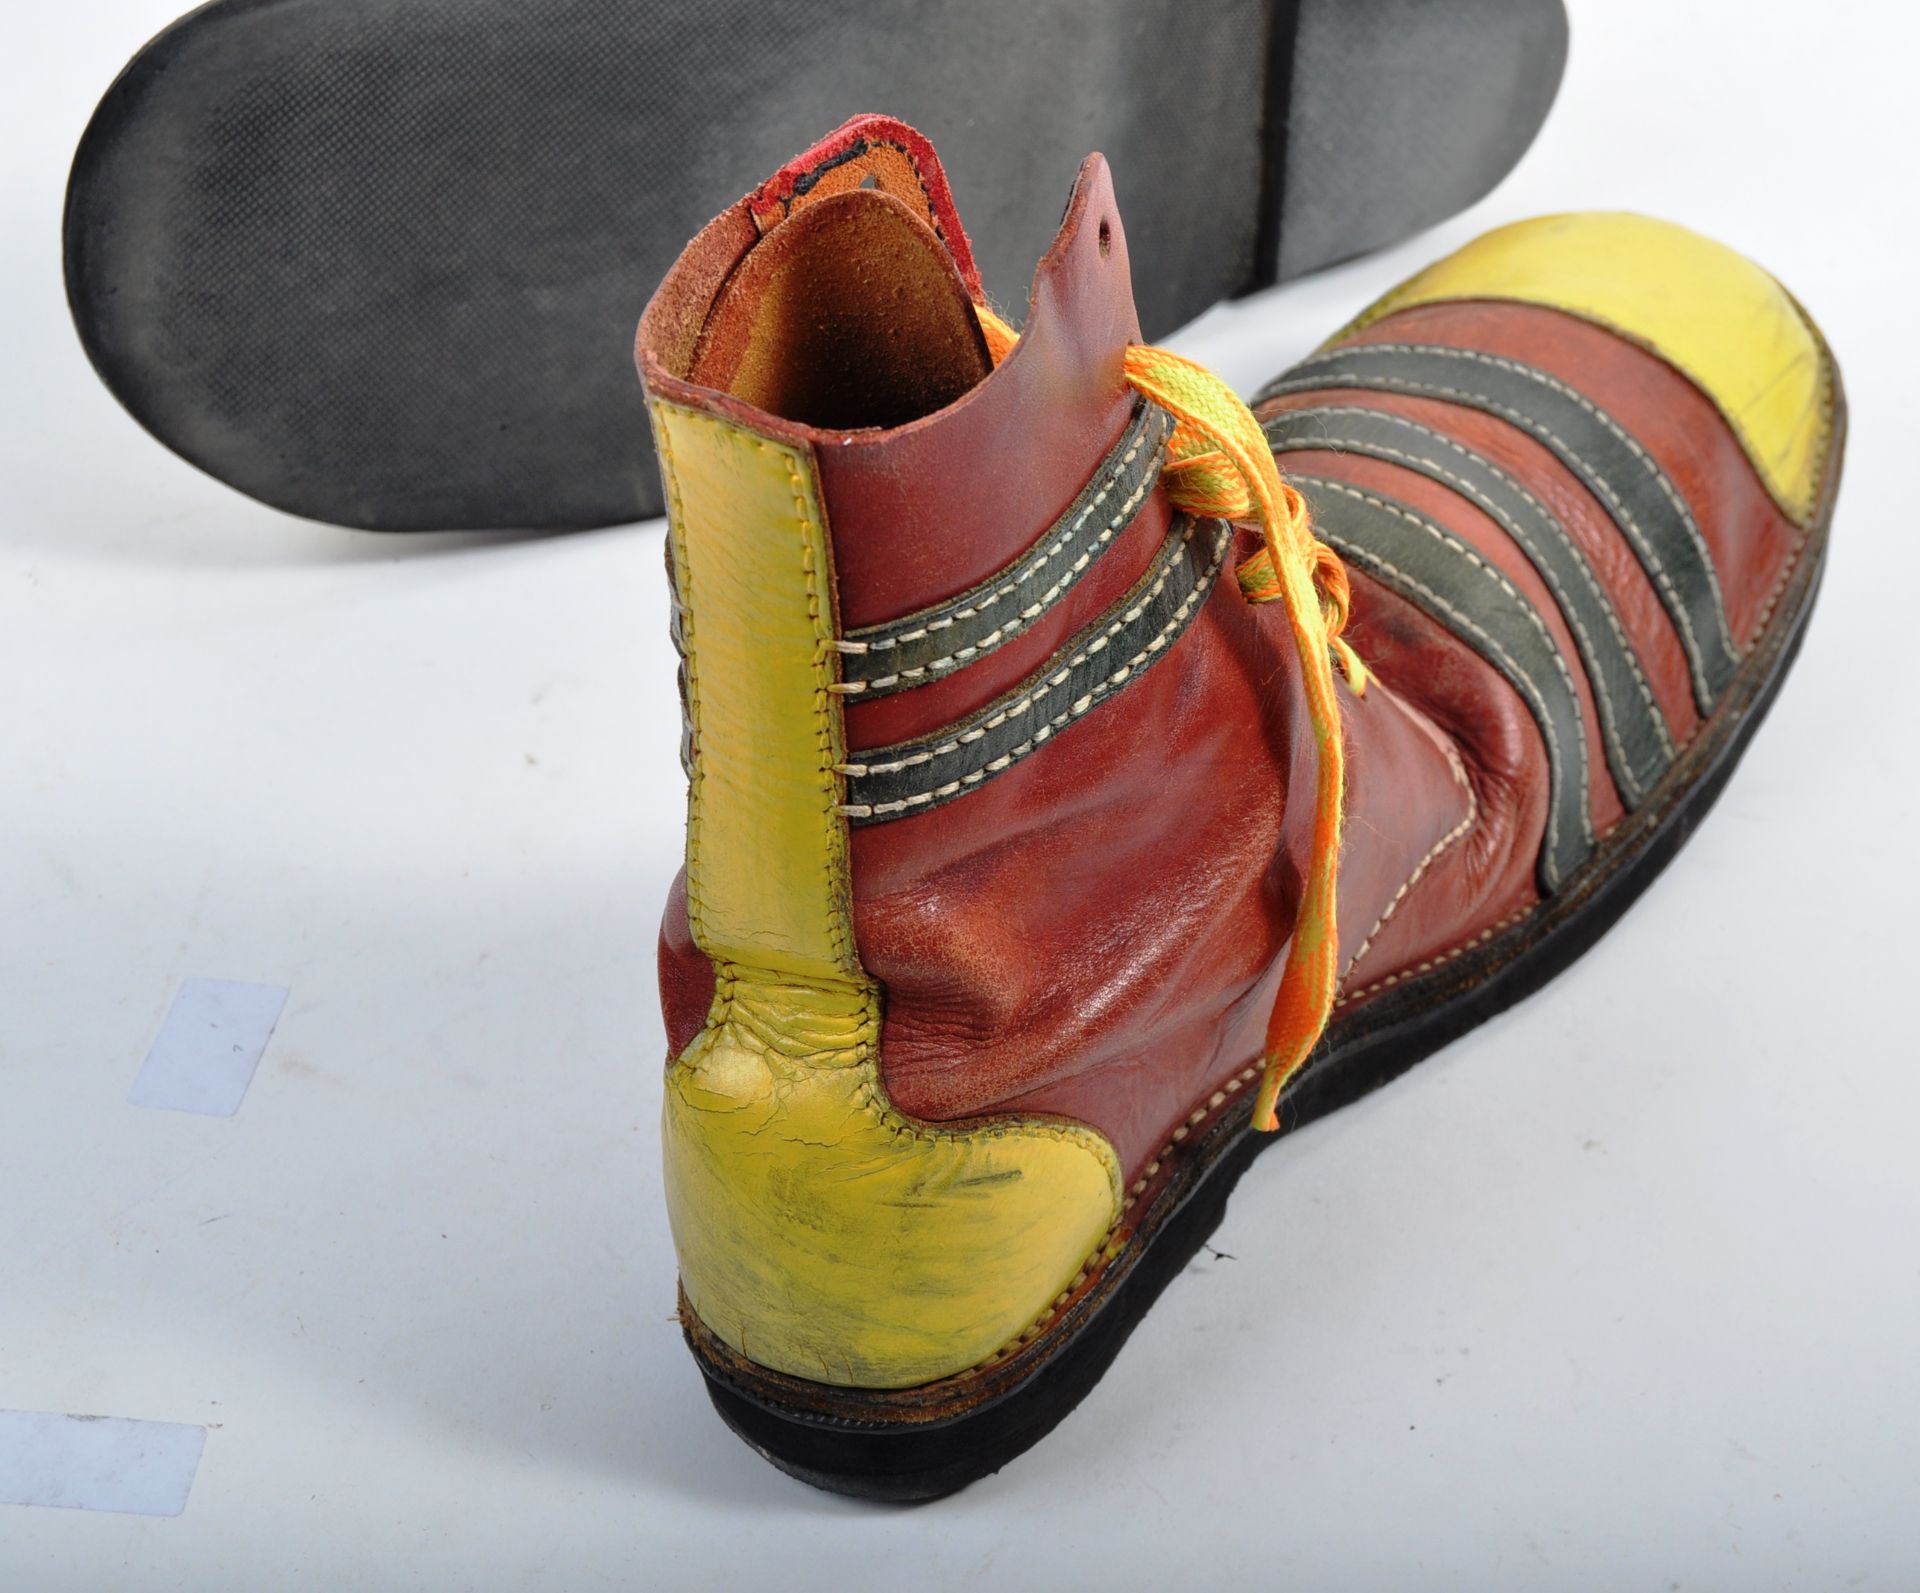 PAIR OF VINTAGE 20TH CENTURY OVERSIZED CLOWN SHOES - Image 5 of 5